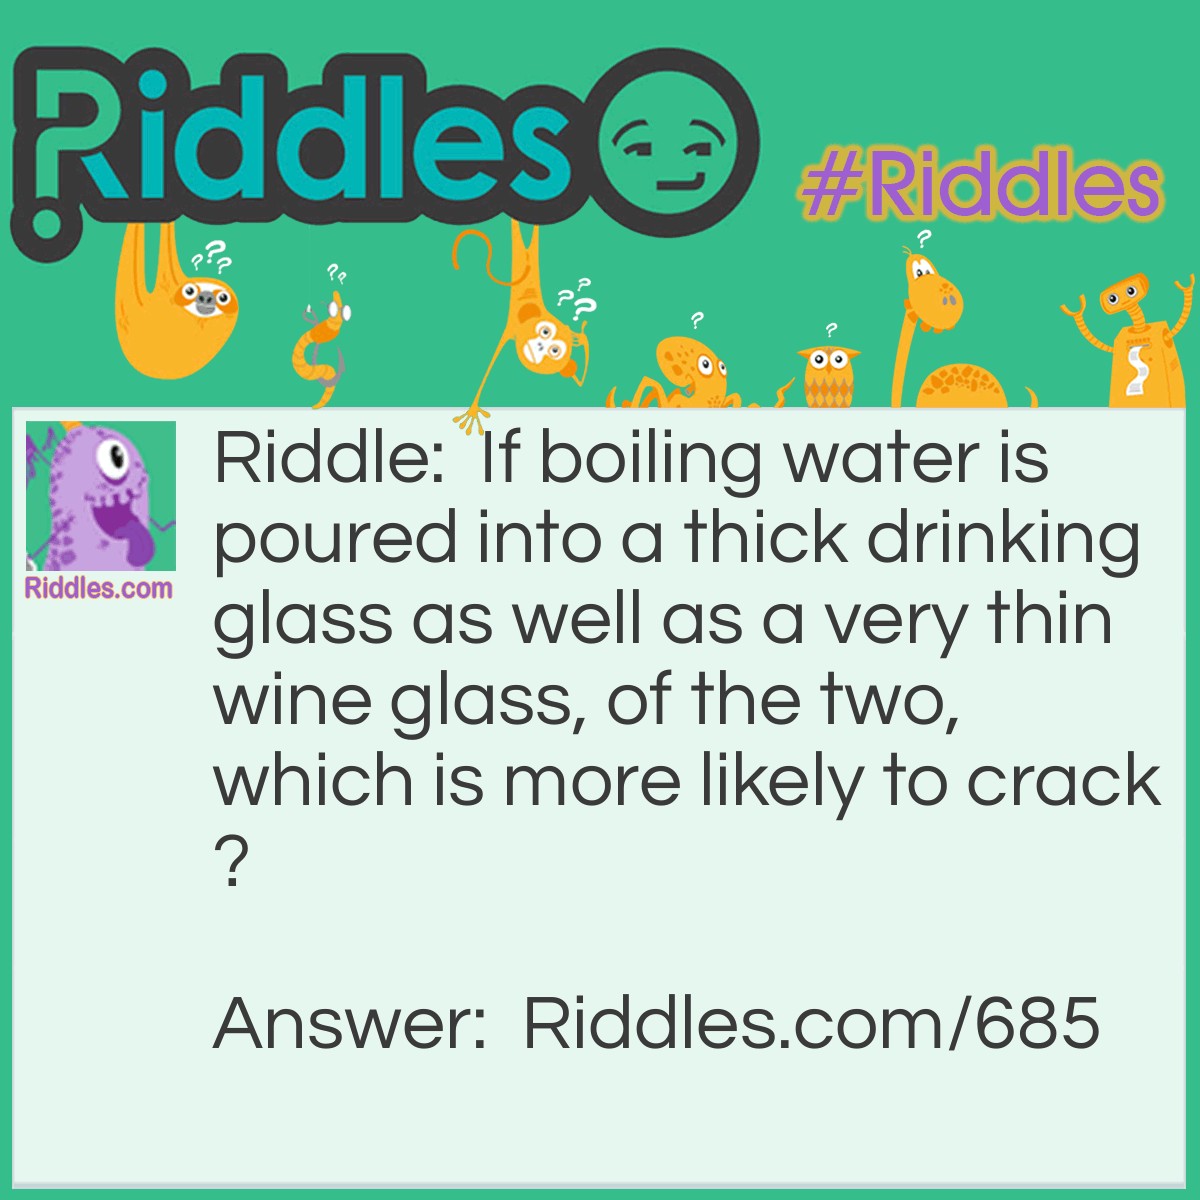 Riddle: If boiling water is poured into a thick drinking glass as well as a very thin wine glass, of the two, which is more likely to crack? Answer: The thick glass is more likely to crack since glass is a poor conductor of heat. In a thin glass, the heat passes more quickly from the glass into the surrounding air, causing the glass to expand equally. When hot water is poured into a thick glass, the inner surface expands, but the outer surface does not. It is this extreme stress on the glass that causes it to crack.